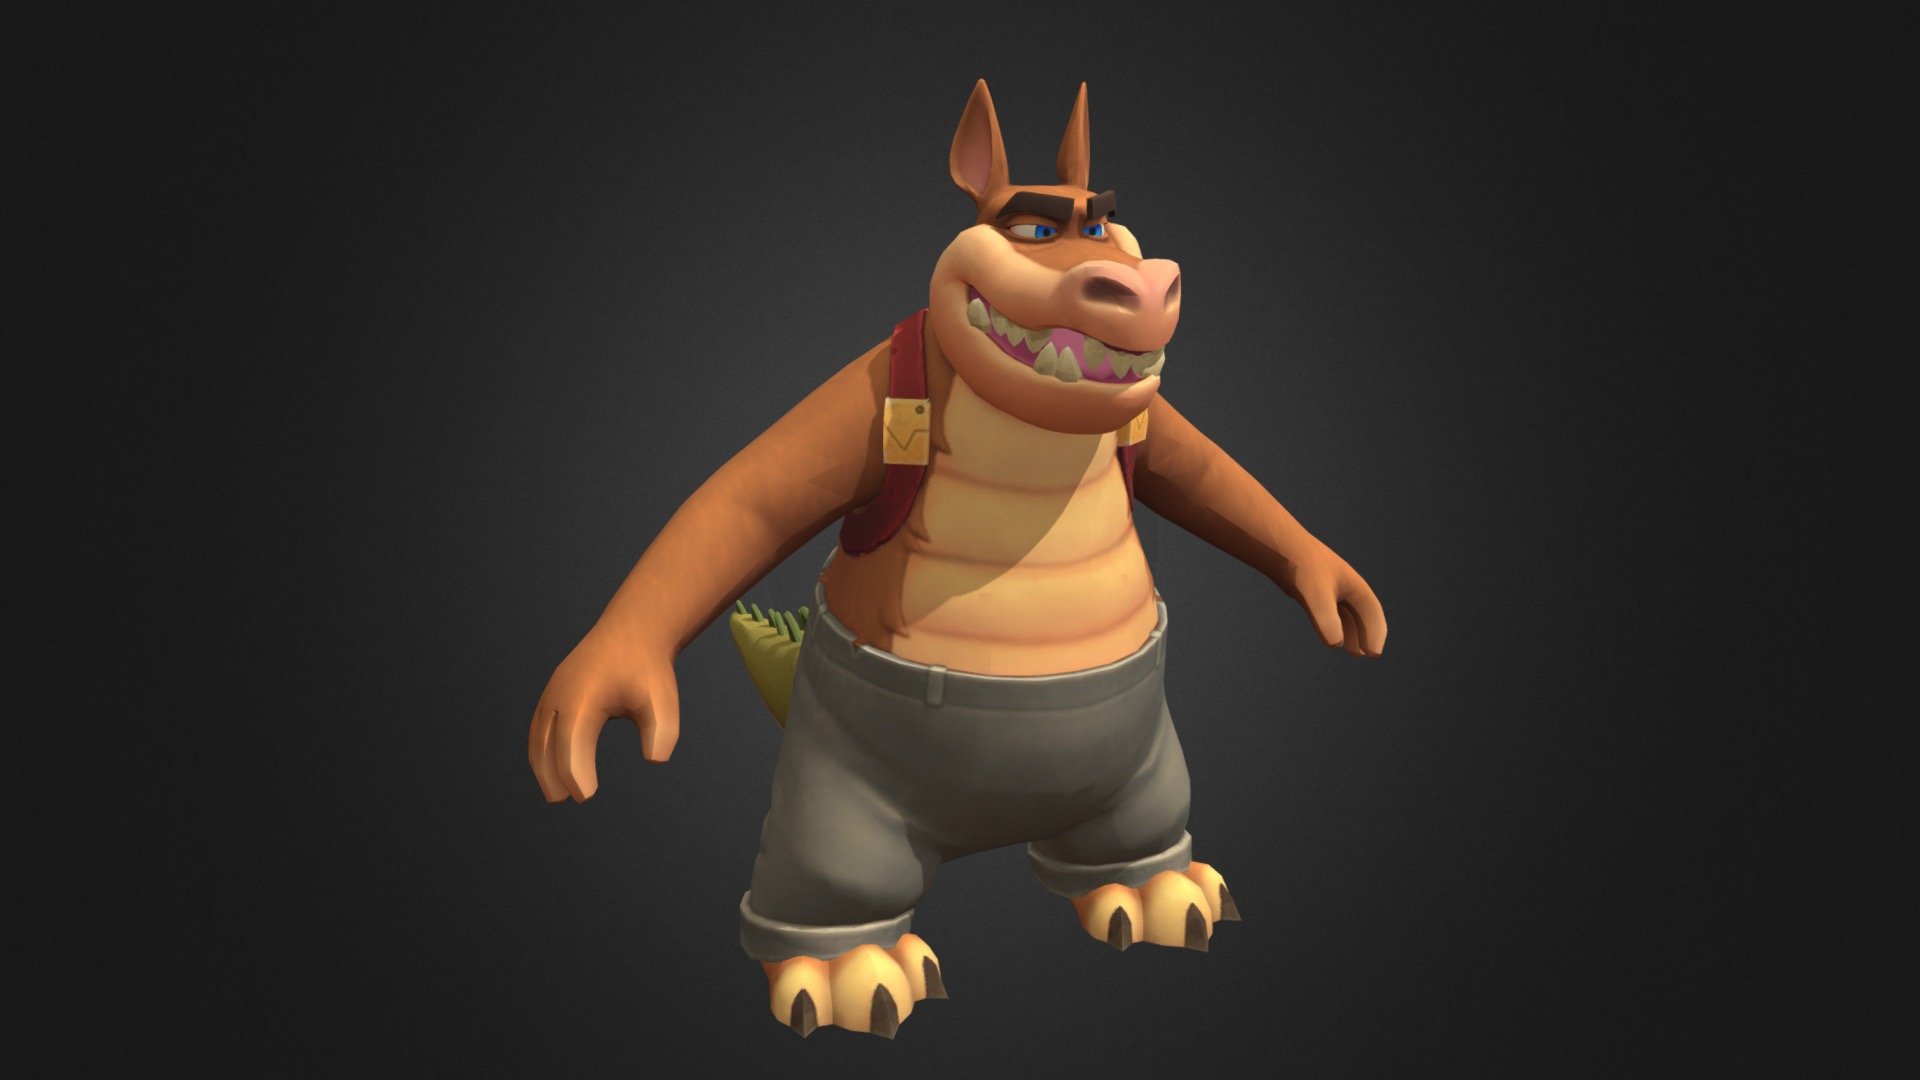 Dingodile Model from Crash On The Run, Model ripped by Smakkohooves
I don't own the model, original model by King and Activision 3d model